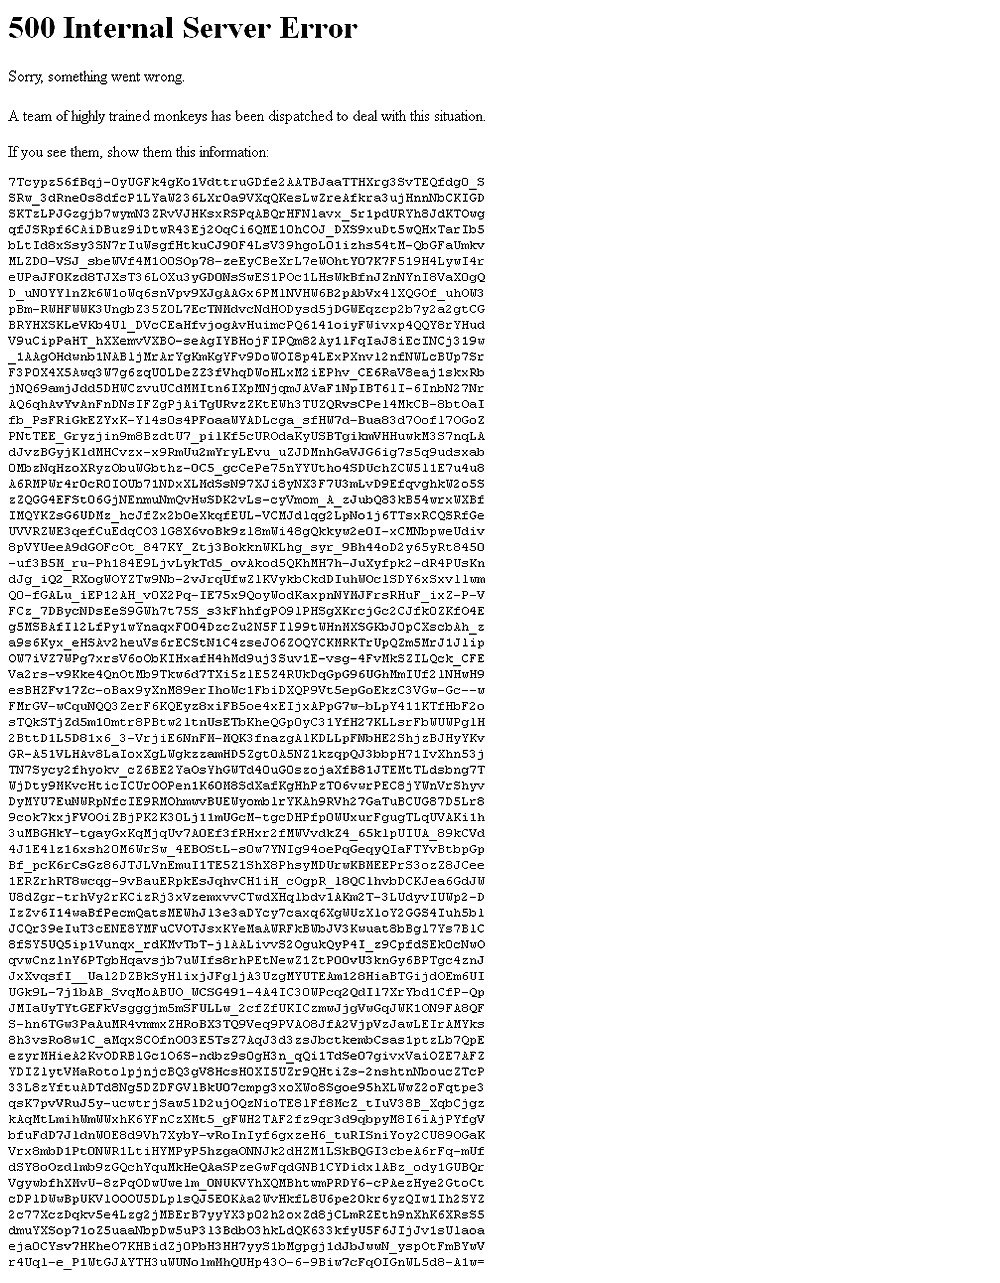 Highly trained monkeys #8299809